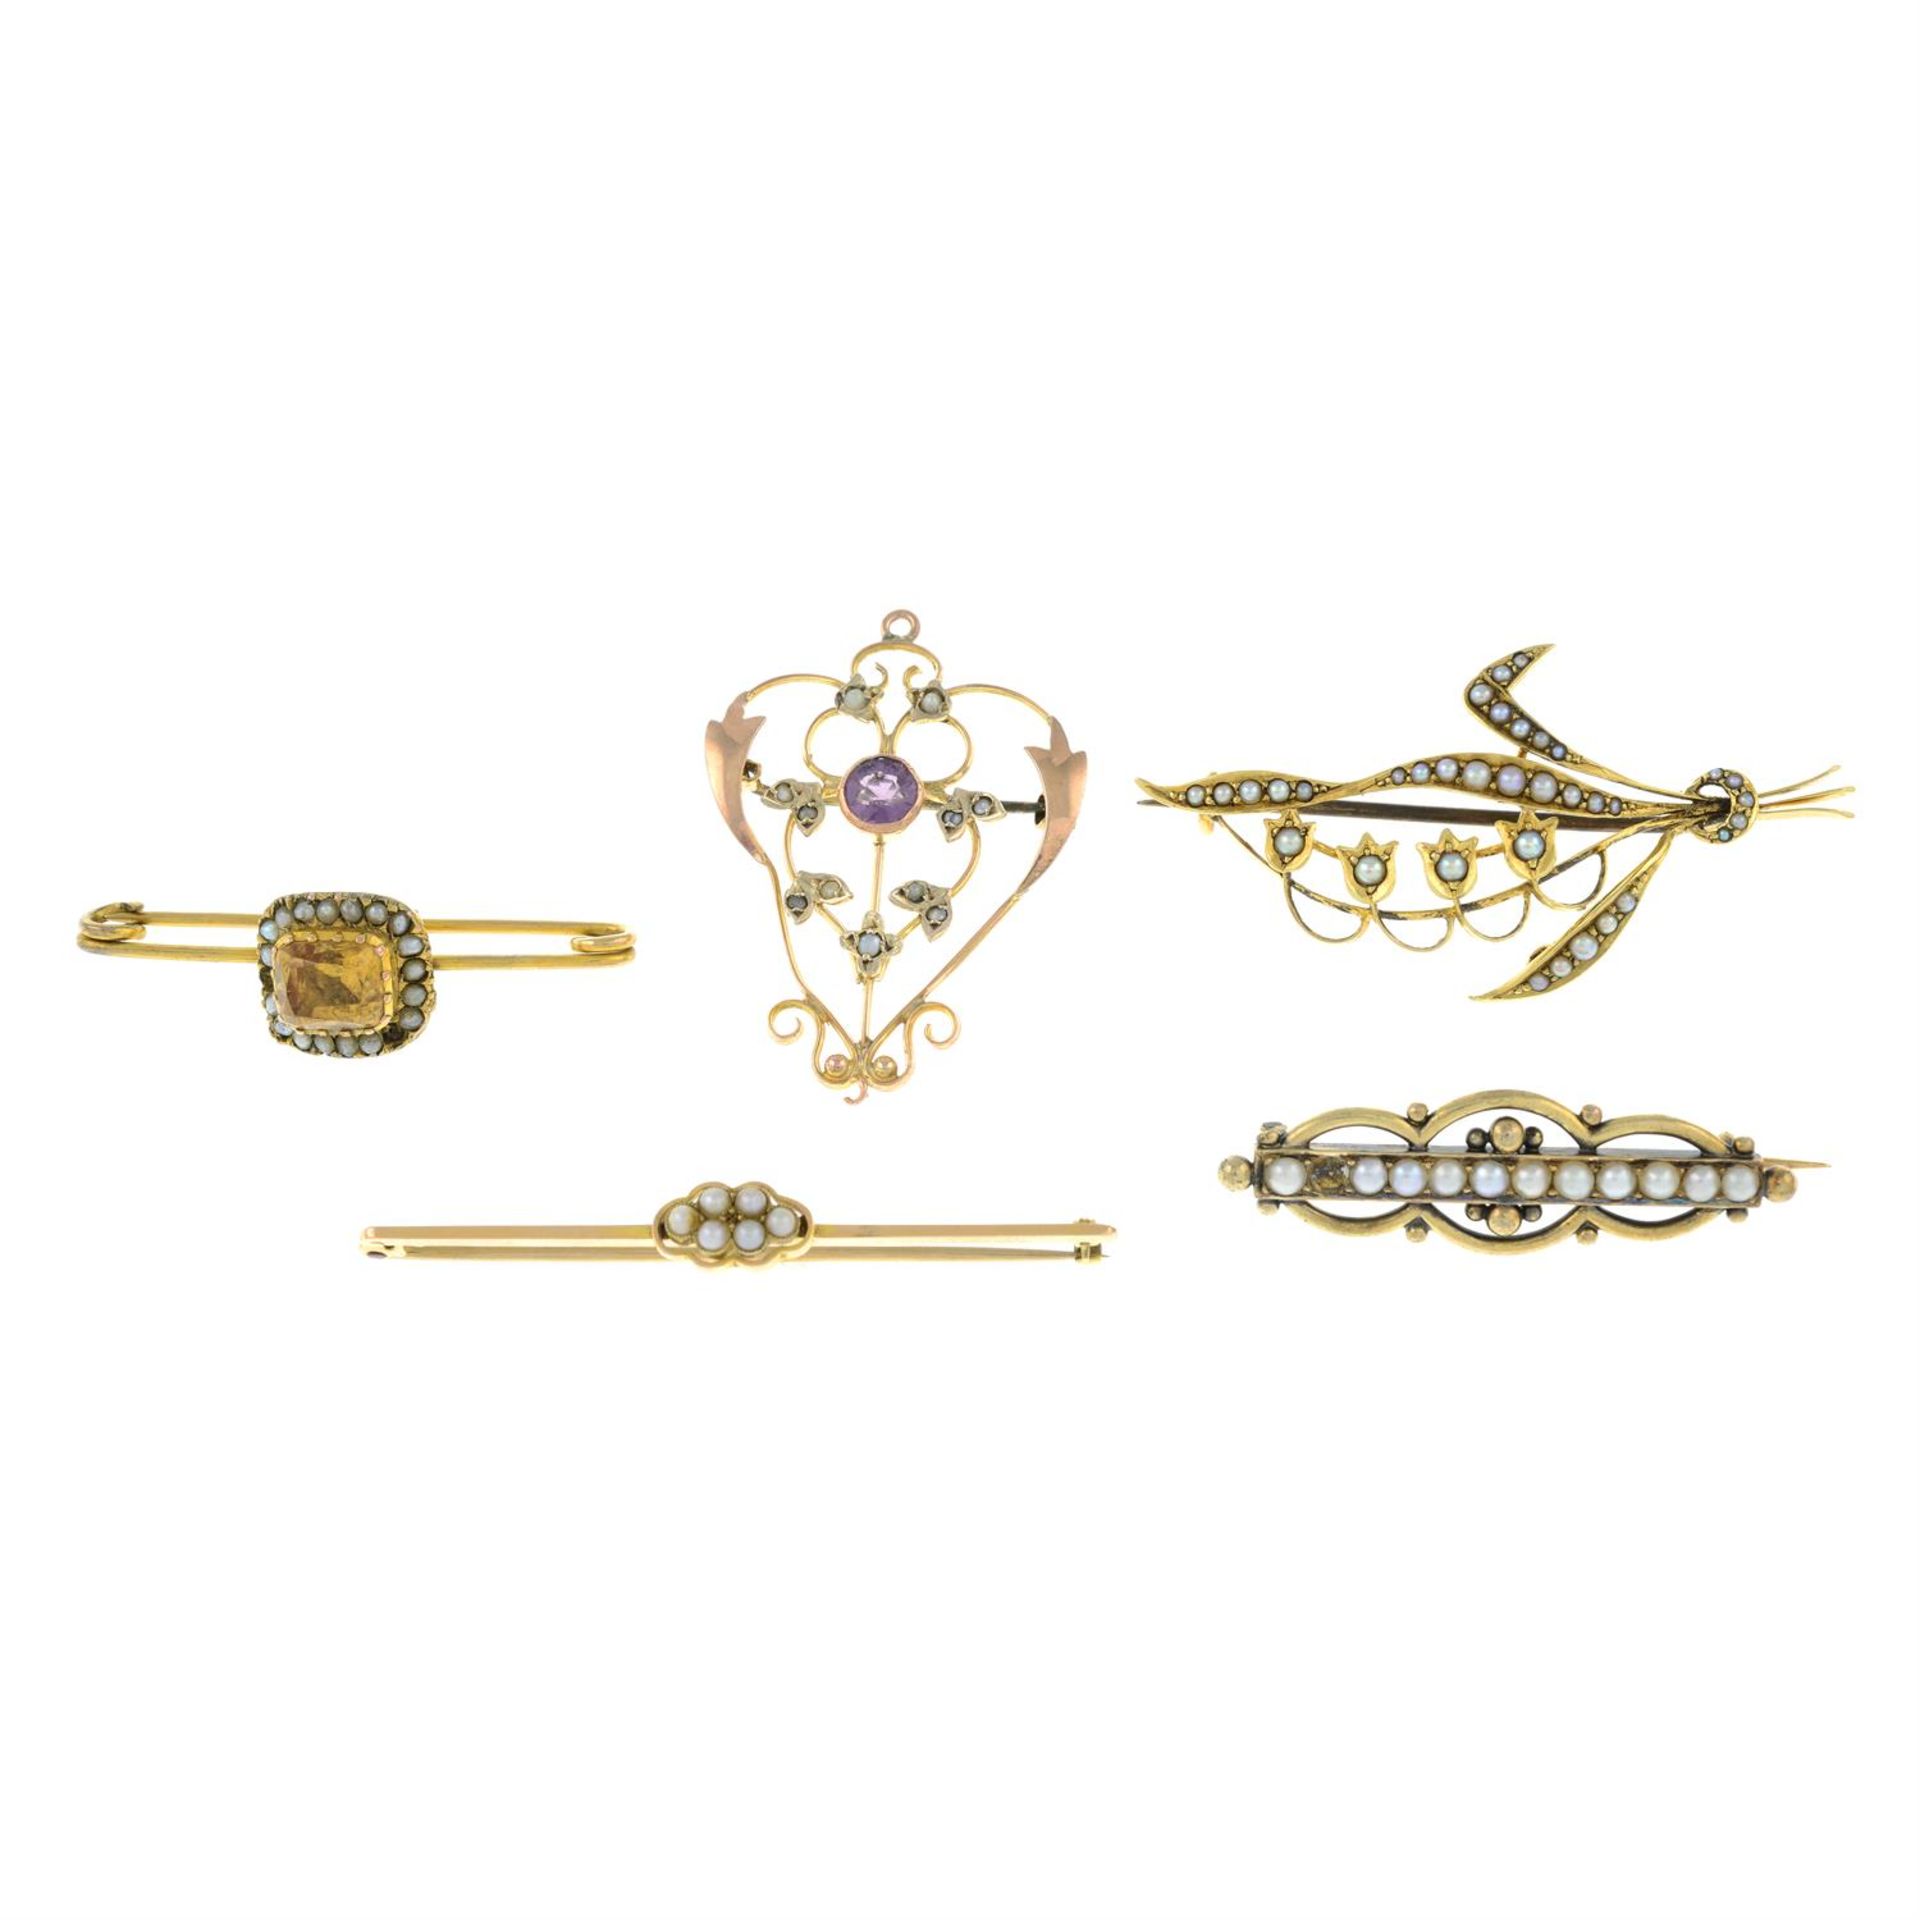 Five late 19th century and later gem-set brooches.